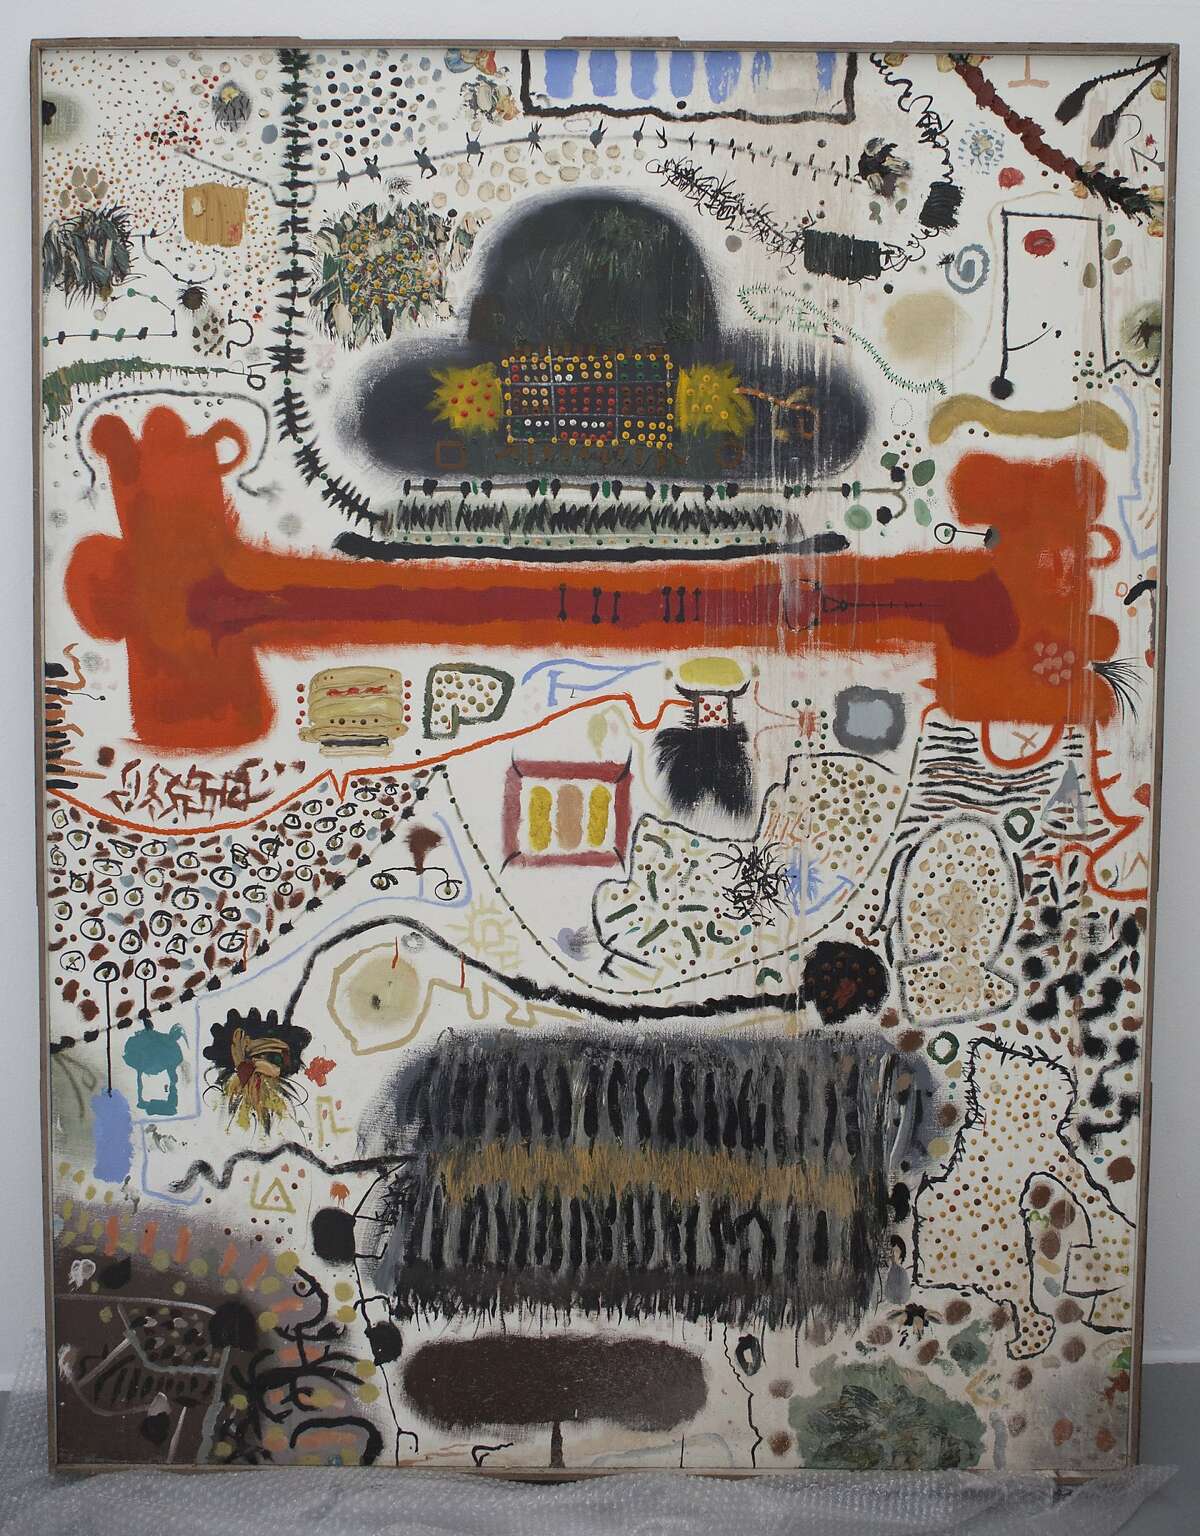 Roy DeForest, Untitled, 1961. Mixed media on canvas. 52 (w) x 68.5 (T) inches